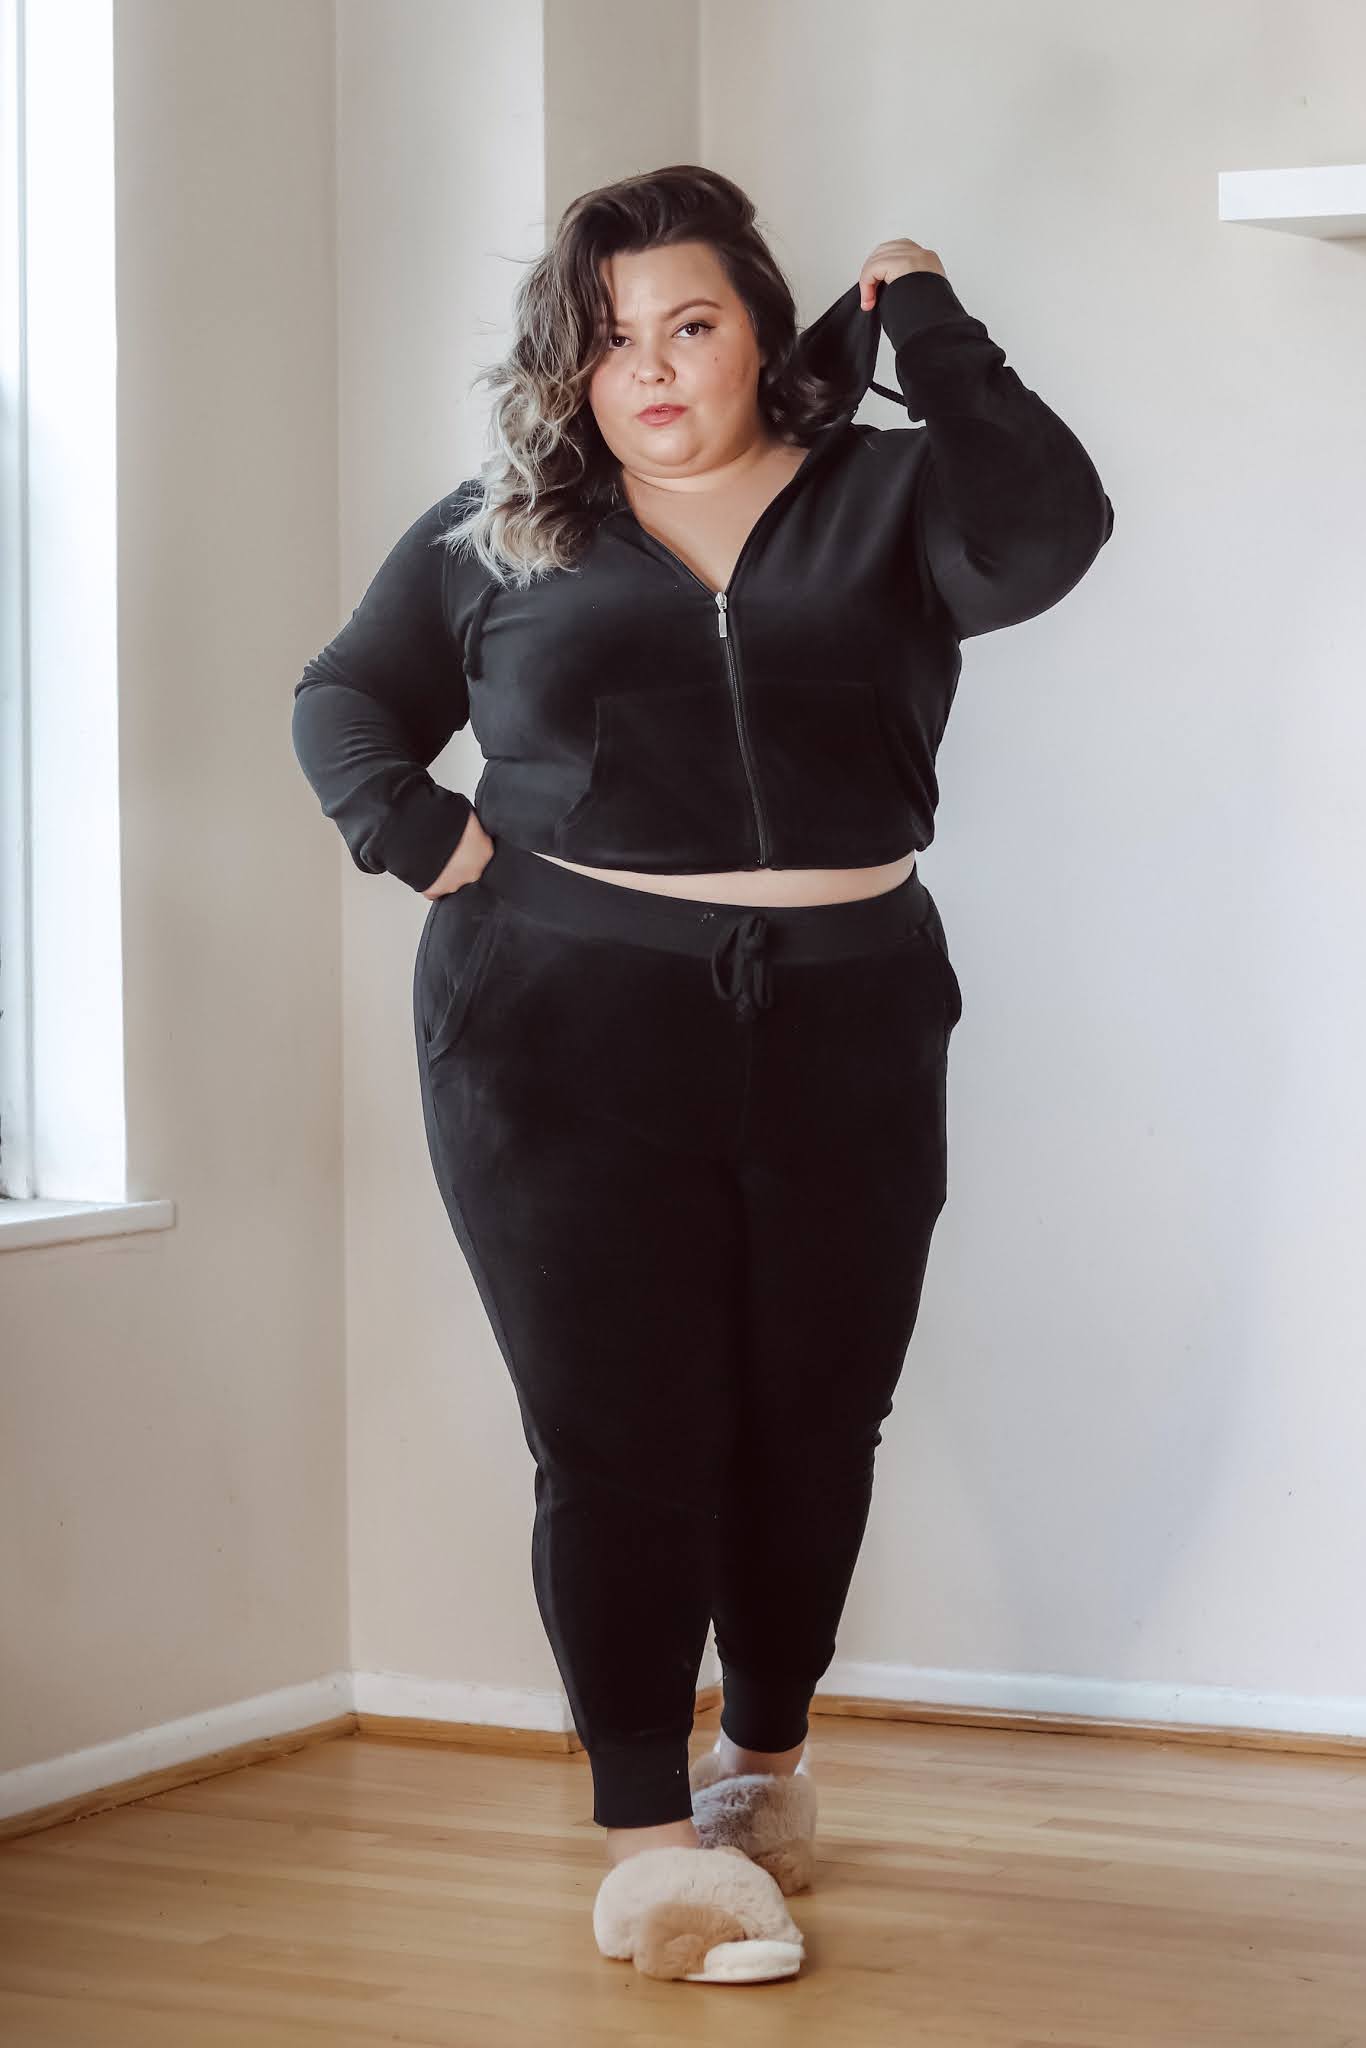 Chicago Plus Size Petite Fashion Blogger Natalie in the City wears a plus size velour tracksuit from Fashion Nova and Juicy Couture.